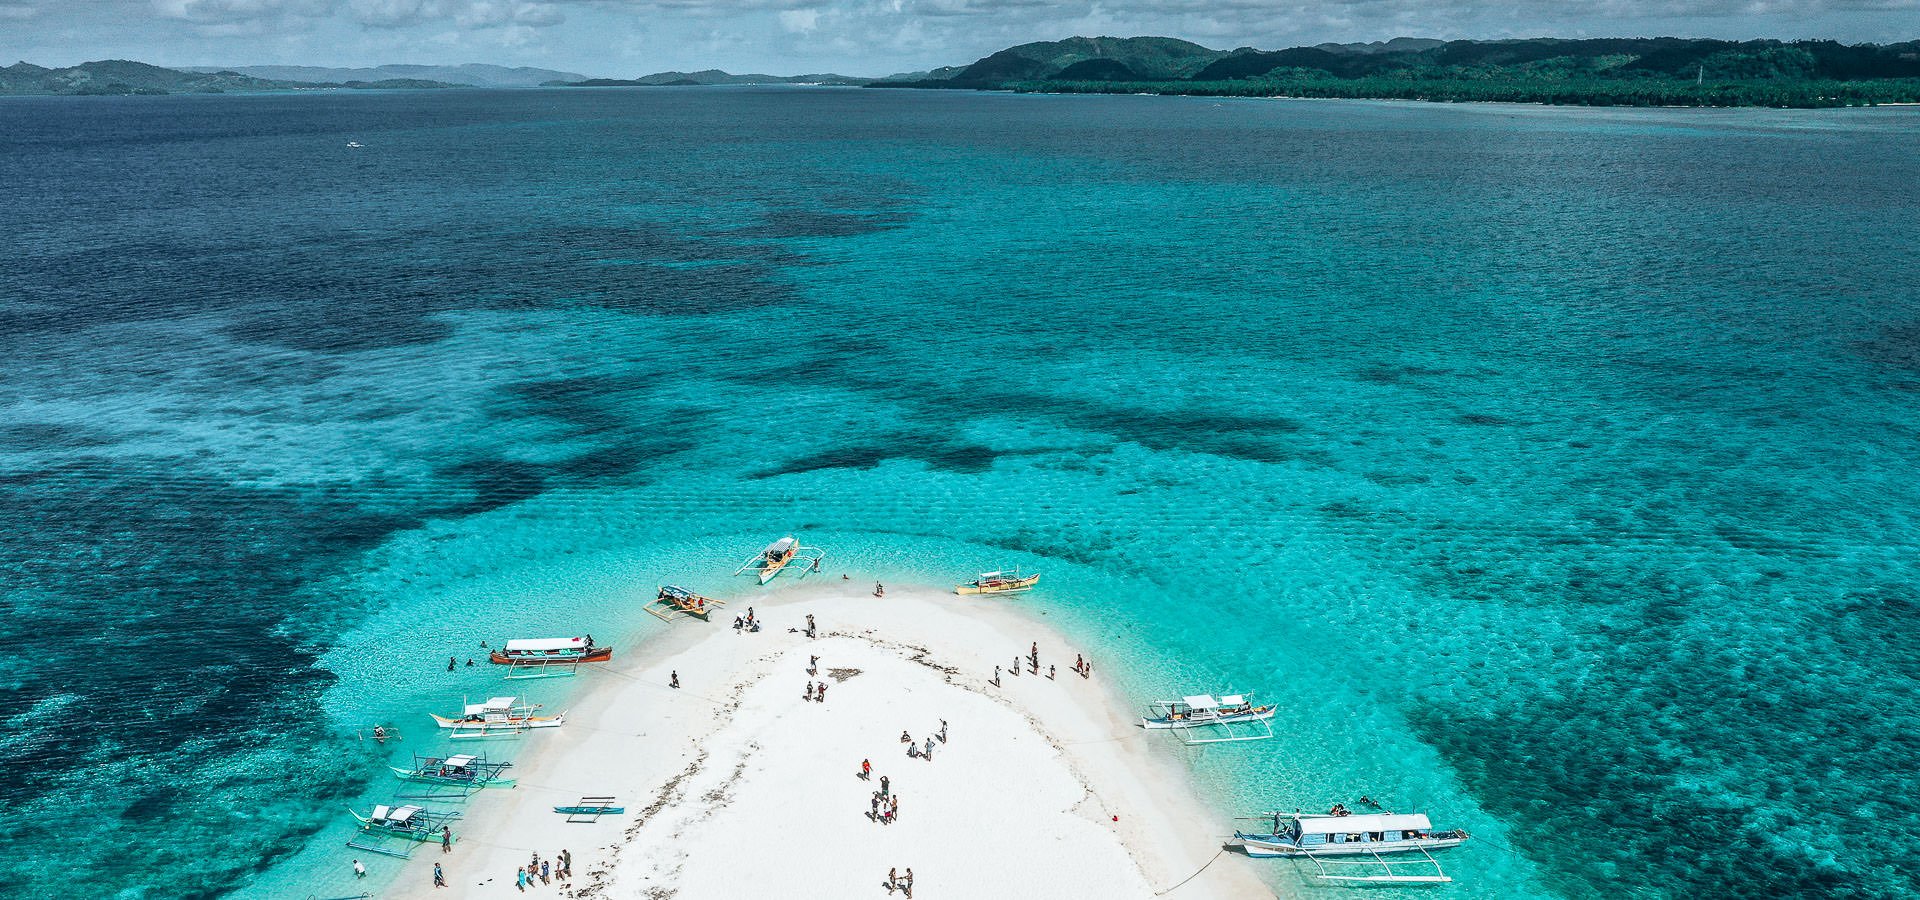 40 Stunning Photos That Will Make You Want To Visit The Philippines | visit the philippines 1